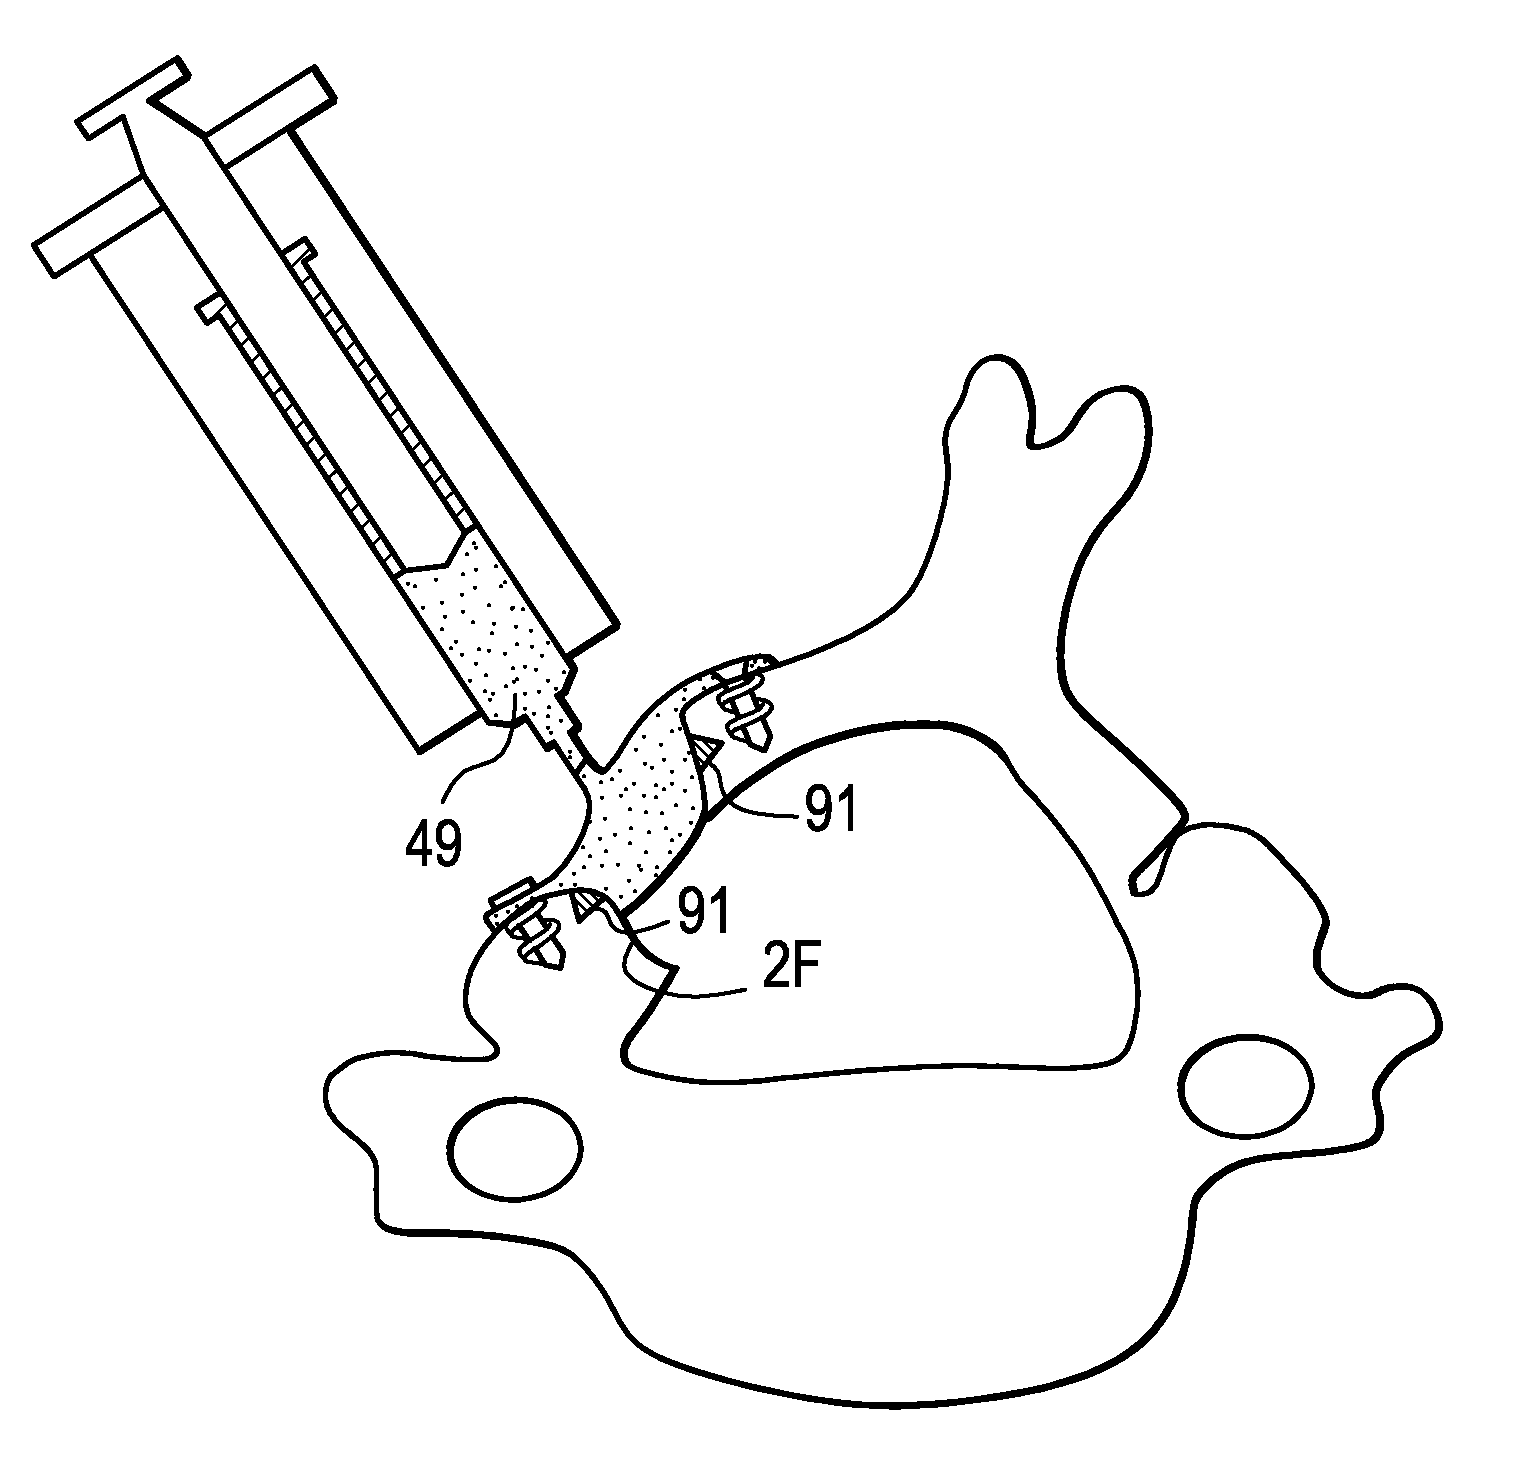 Methods and devices for expanding a spinal canal using balloons